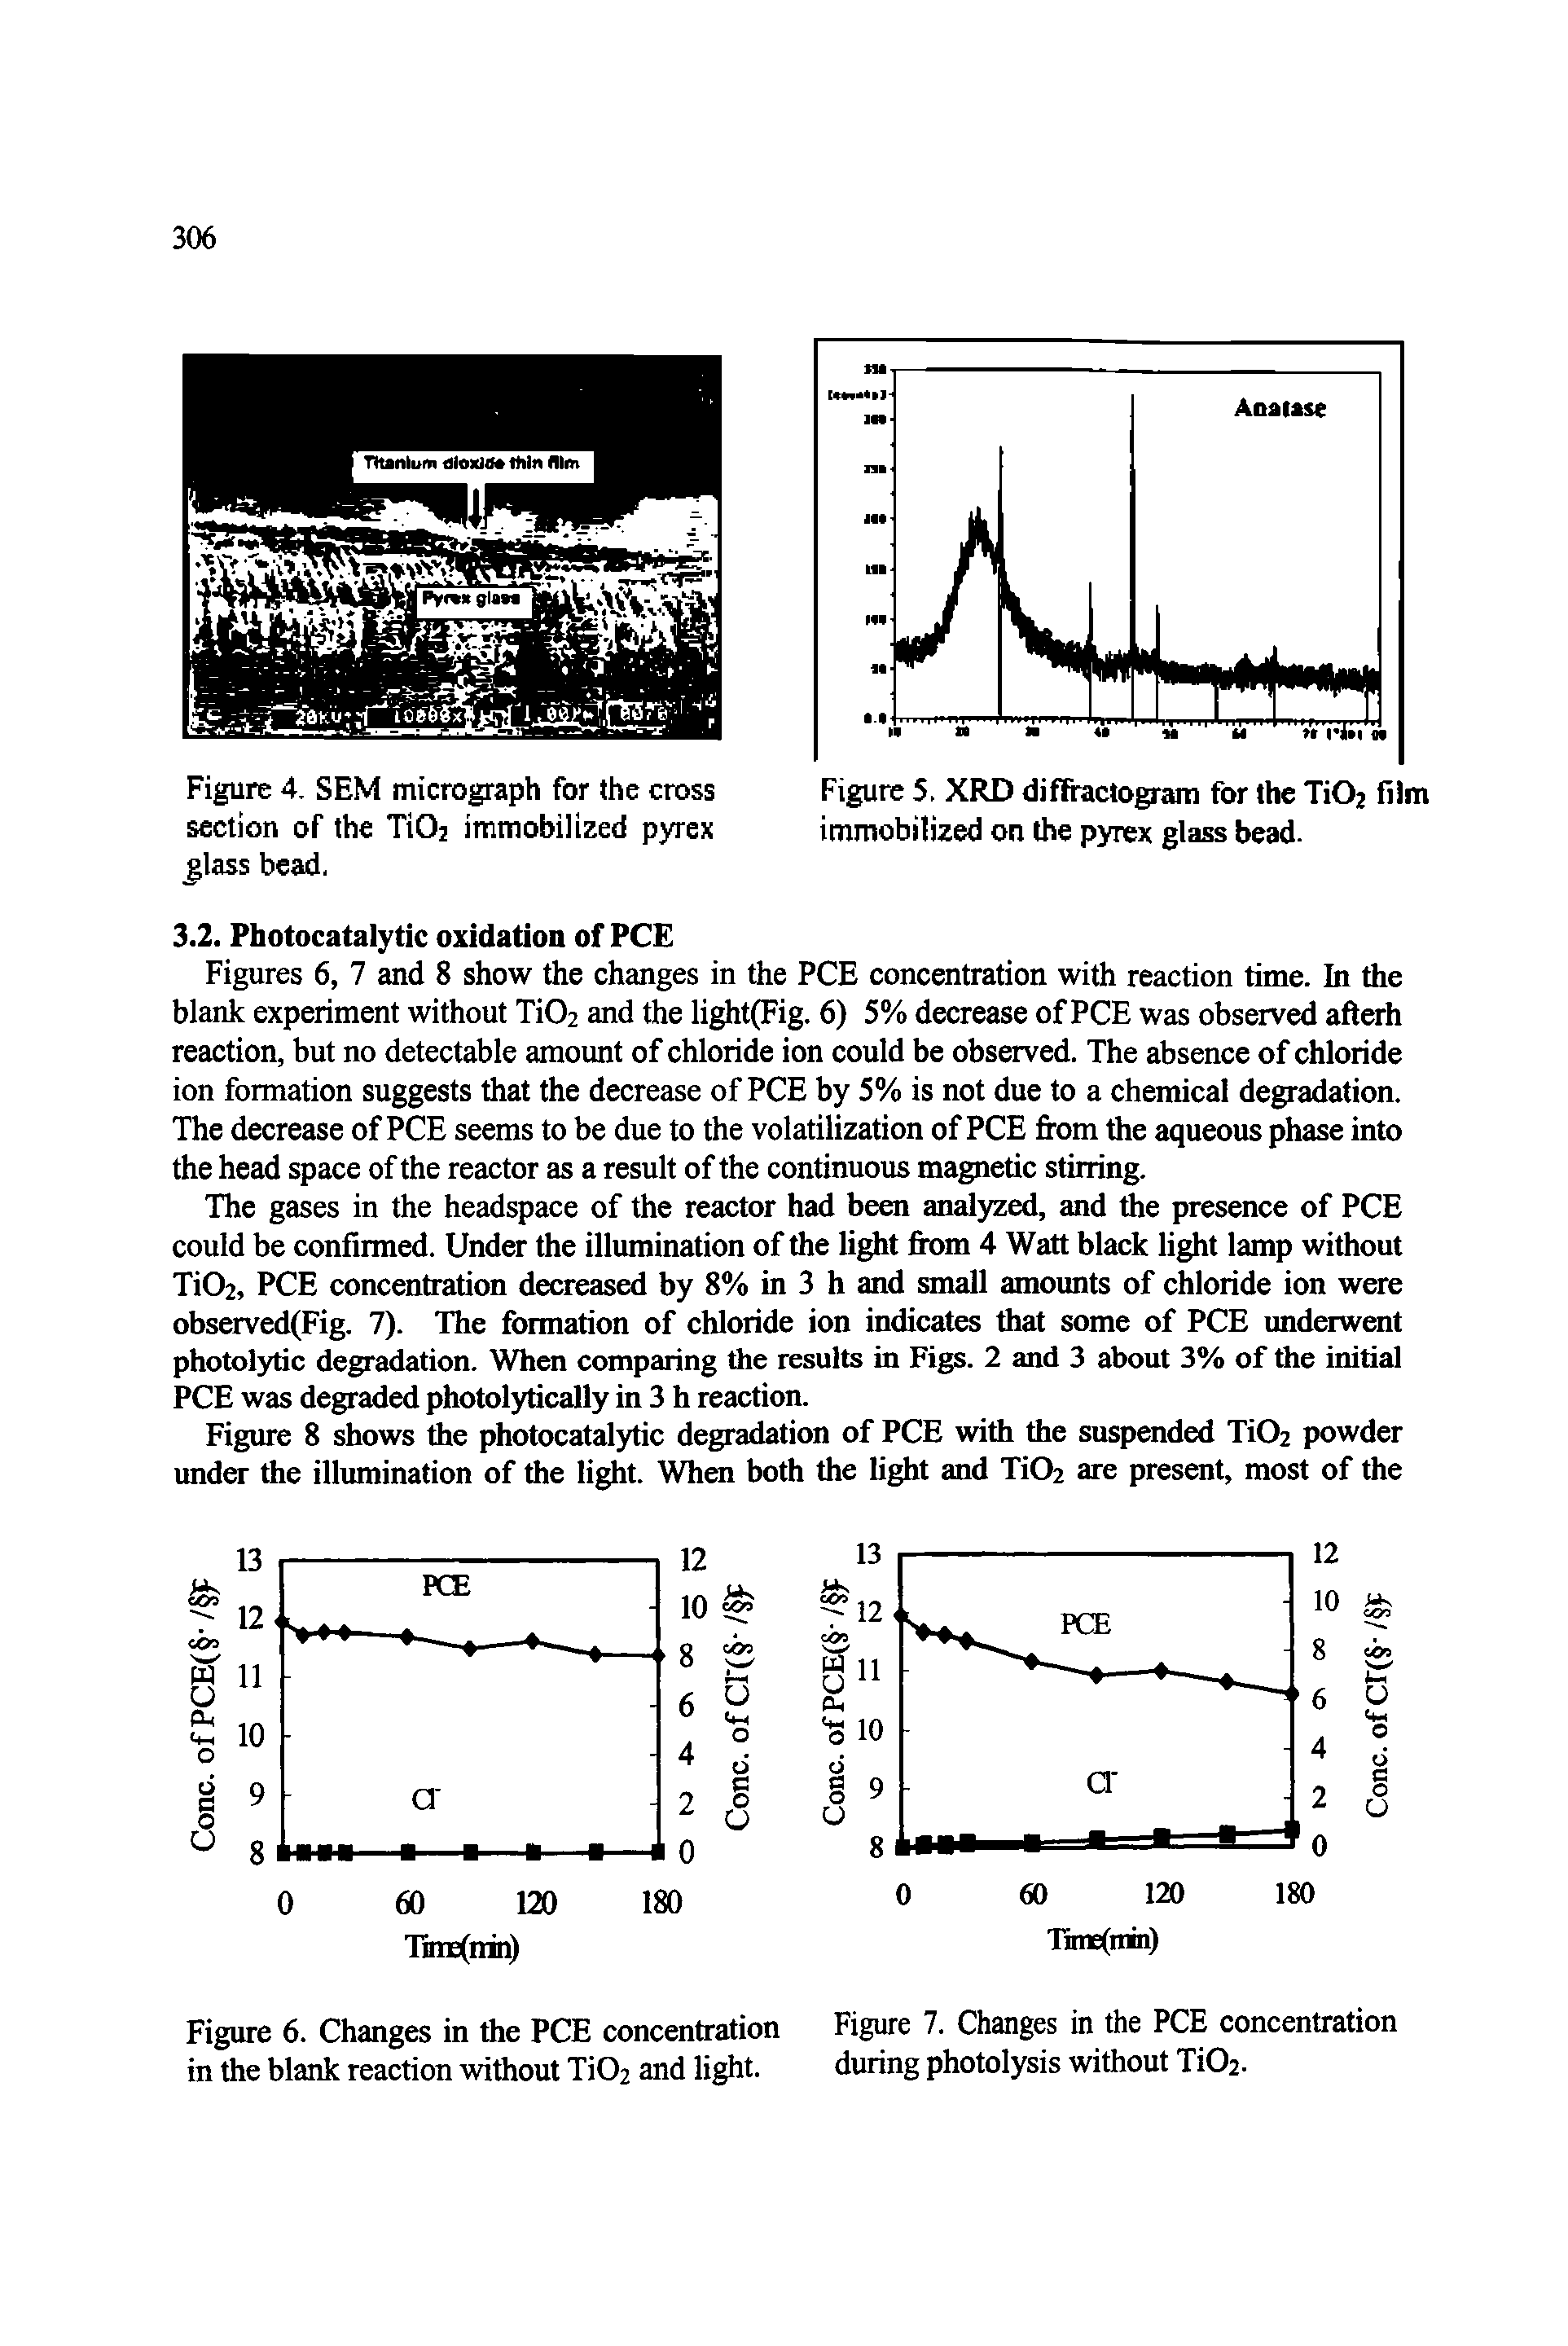 Figures 6, 7 and 8 show the changes in the PCE concentration with reaction time. In the blank experiment without Ti02 and the light(Fig. 6) 5% decrease of PCE was observed afterh reaction, but no detectable amount of chloride ion could be observed. The absence of chloride ion formation suggests that the decrease of PCE by 5% is not due to a chemical degradation. The decrease of PCE seems to be due to the volatilization of PCE from the aqueous phase into the head space of the reactor as a result of the continuous magnetic stirring.